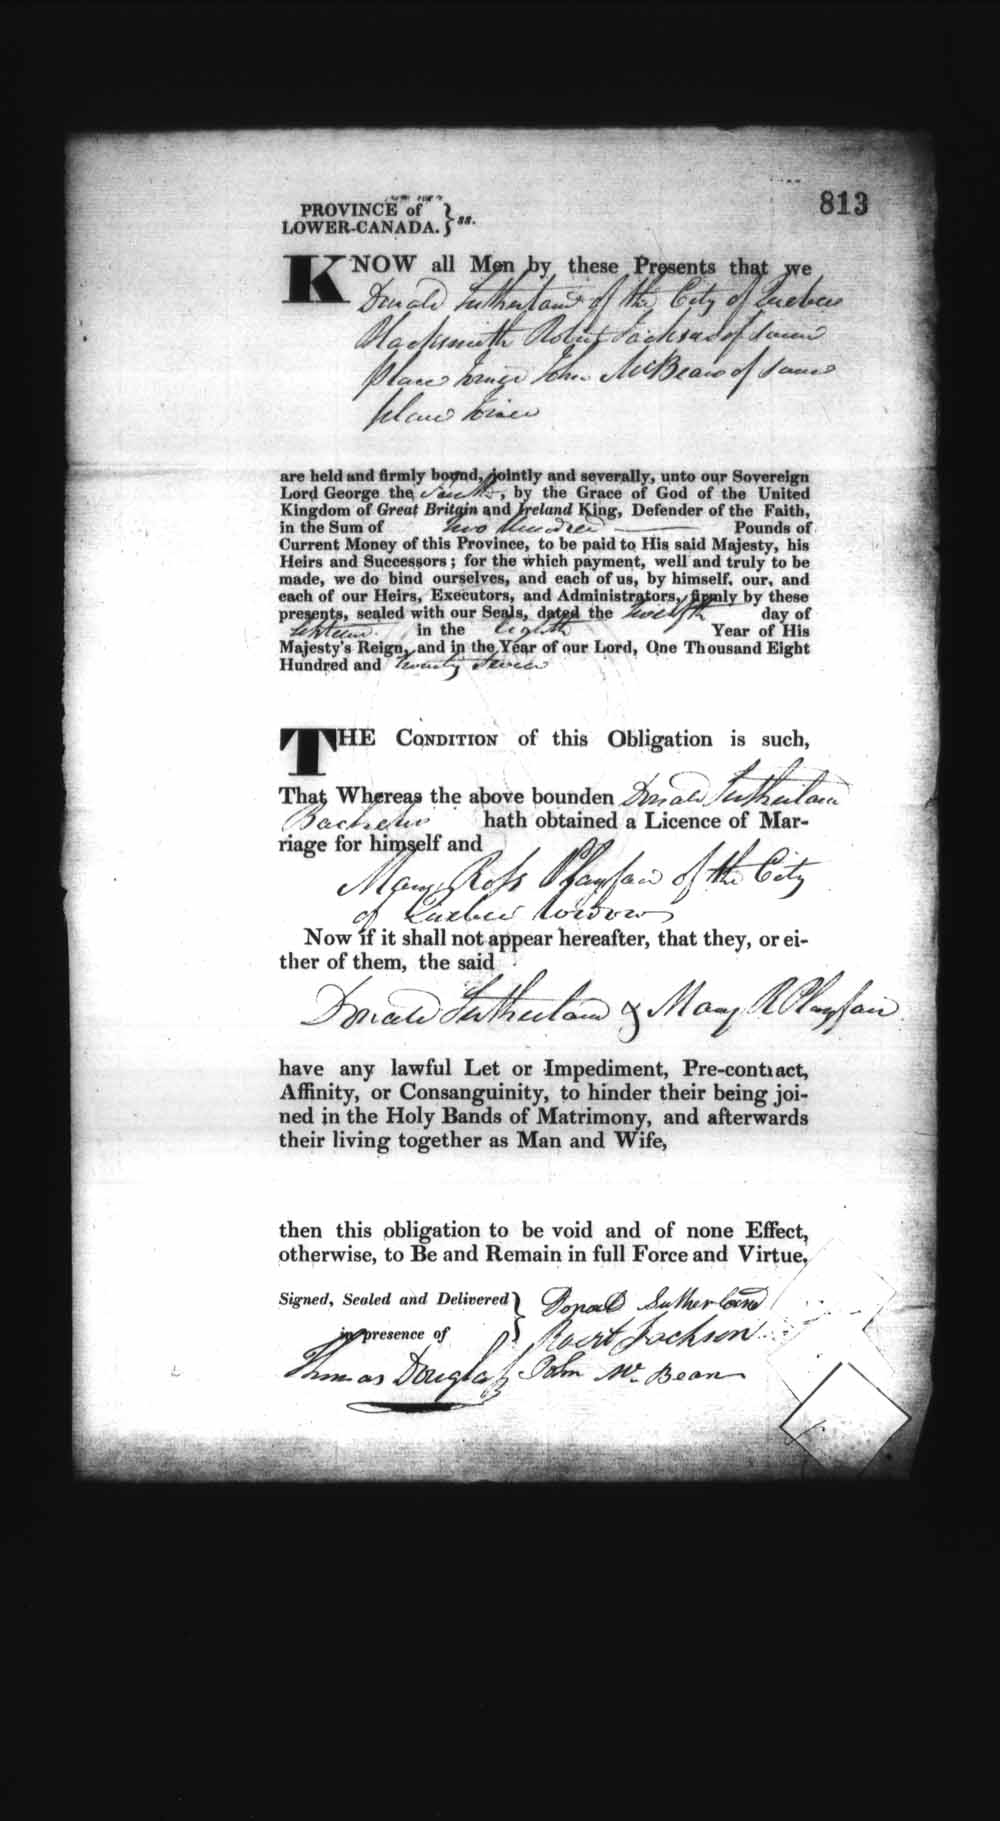 Digitized page of Upper and Lower Canada Marriage Bonds (1779-1865) for Image No.: e008236891